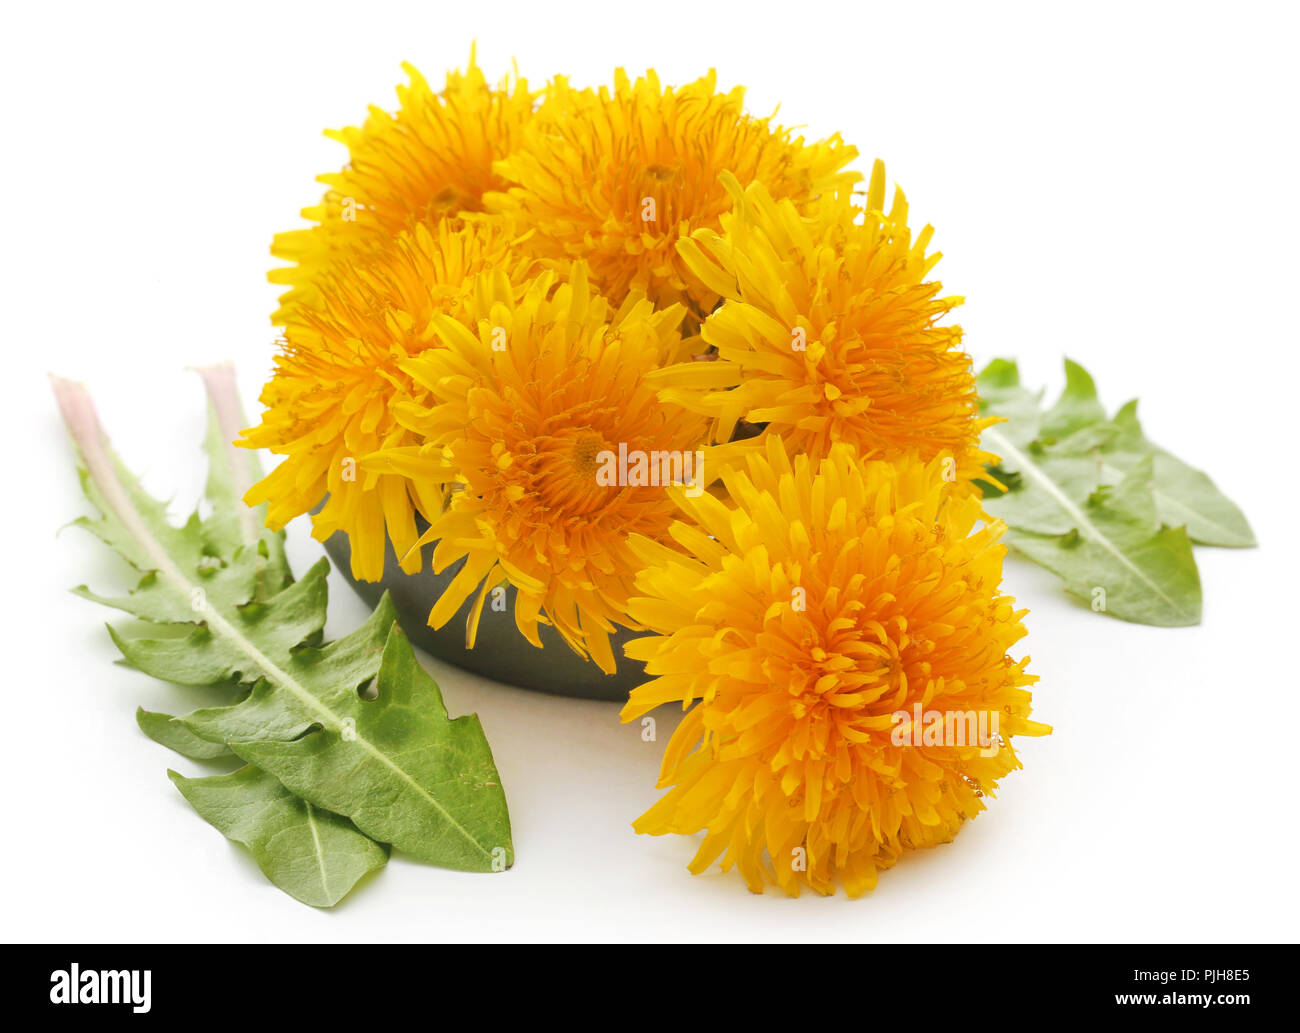 Medicinal dandelion with green leaves over white background Stock Photo